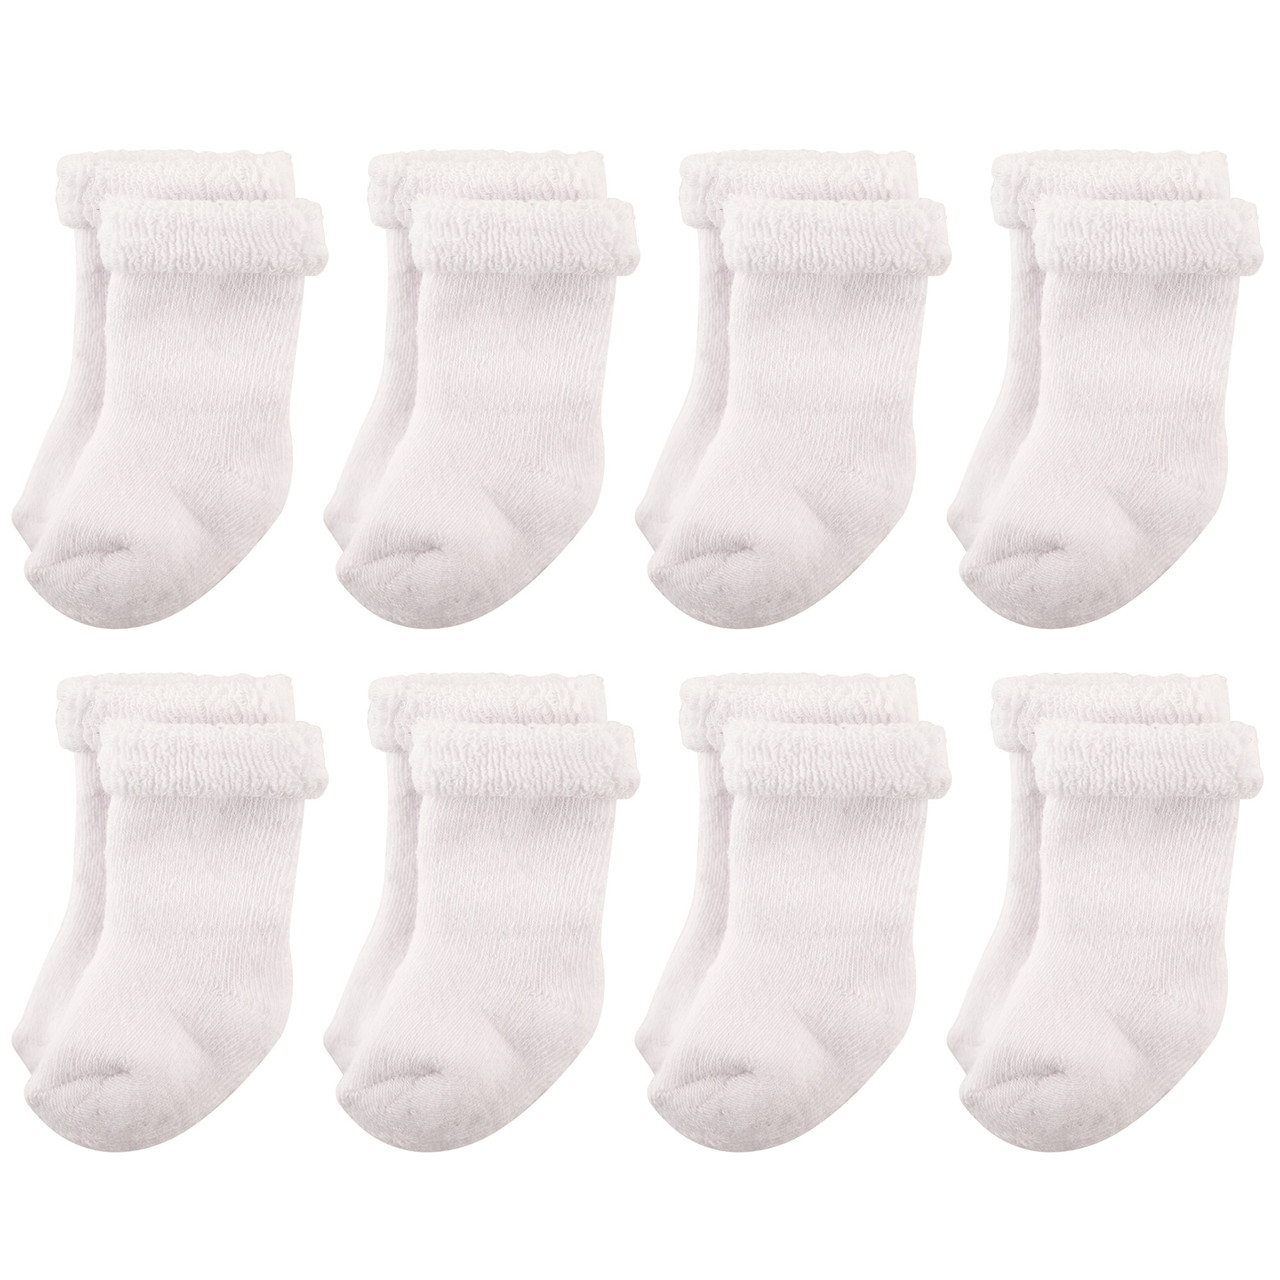 Hudson Baby Rolled Cuff Crew Socks, 8-Pack, White | Baby and Toddler ...